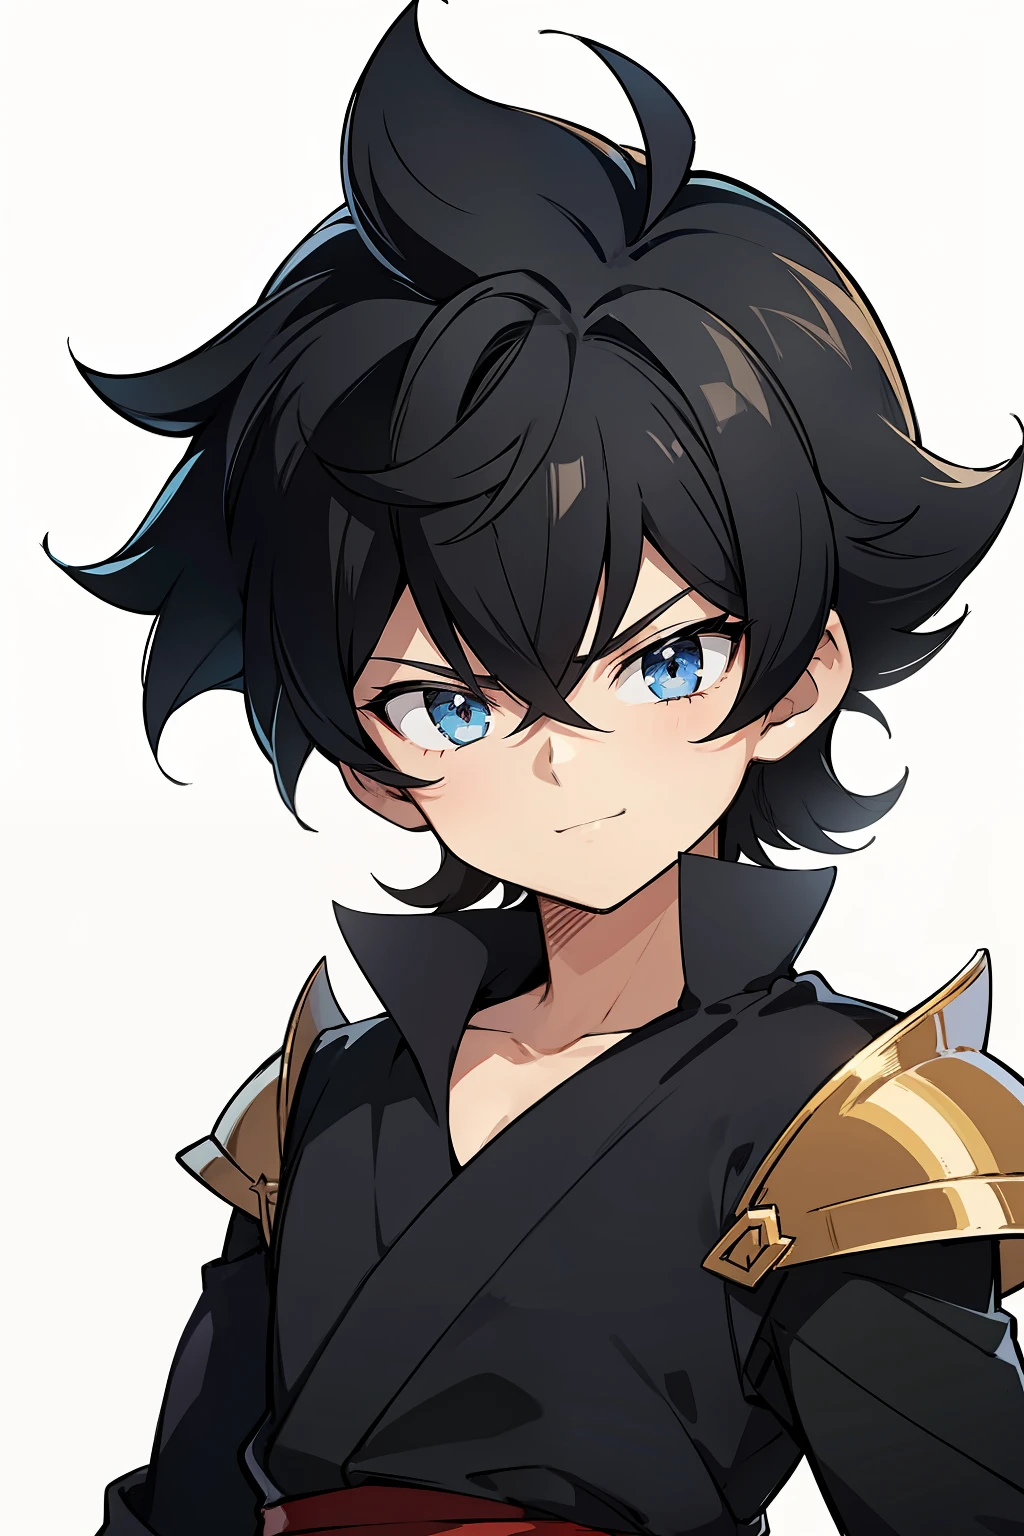 (high-quality, breathtaking),(expressive eyes, perfect face) portrait, 1boy, male, solo, young kid, , black hair, blue coloured eyes, stylised hair, gentle smile, medium length hair, loose hair, side bangs, curley hair, really spiky hair, spiked up hair, looking at viewer, portrait, ancient greek clothes, black long sleeved tunic gold trim around collar edges and down middle, greek, red and gold sash, simple background, slightly narrow eyes, masculine face, masculine eyes, baby face,happy expression, clothes similar to Hypnos Saint Seiya, 6 years old, tiny